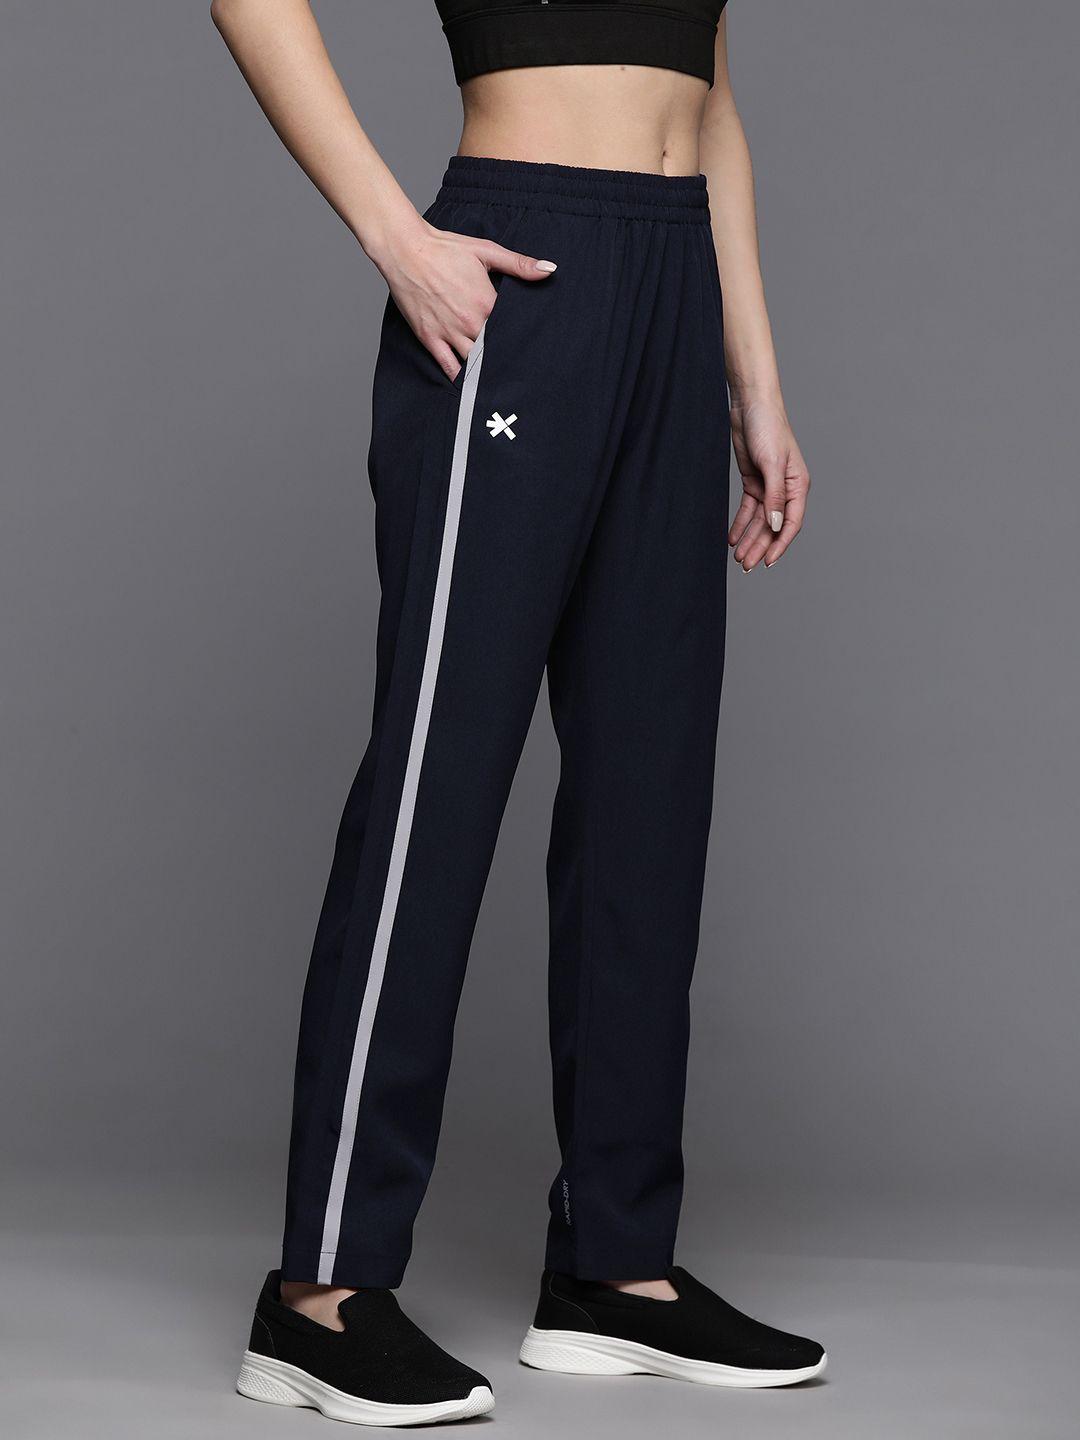 hrx by hrithik roshan women rapid-dry training track pants with reflective detail